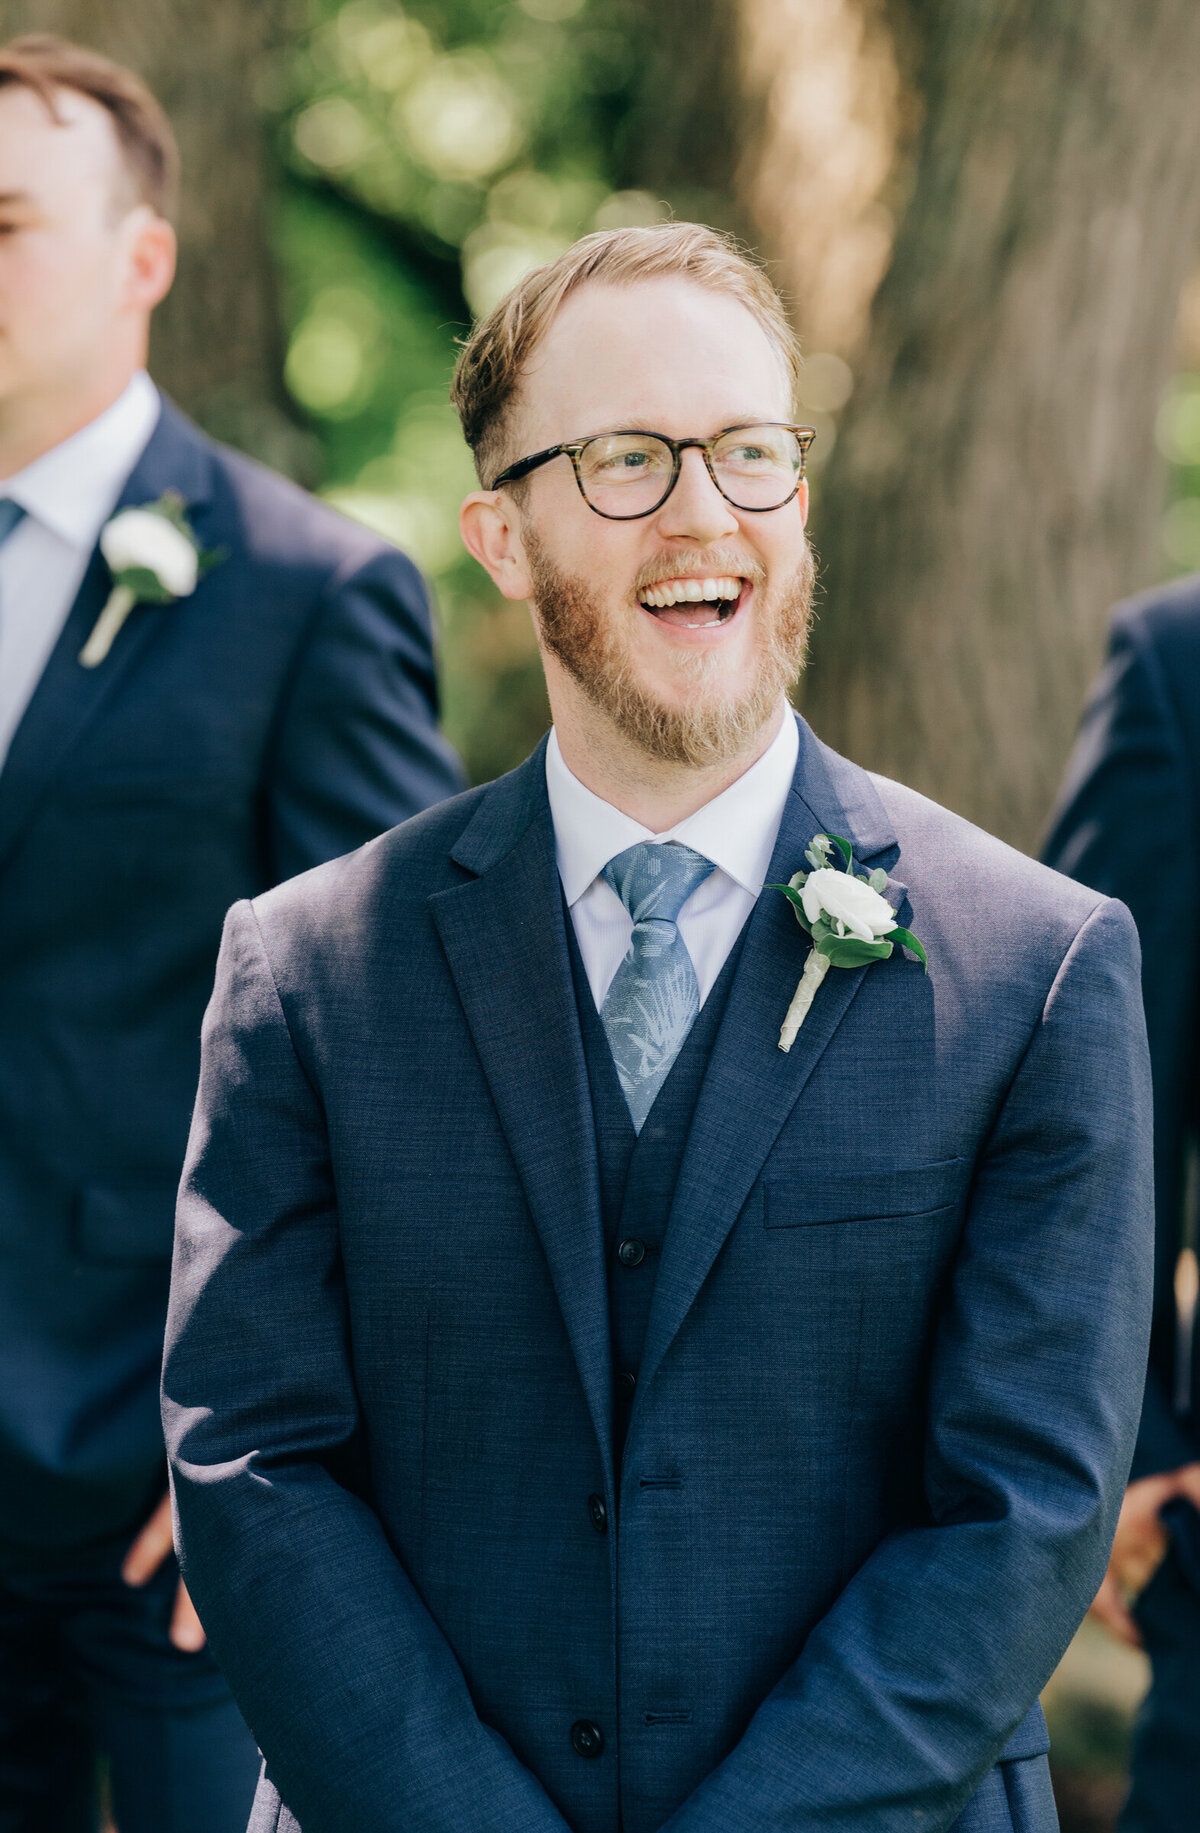 Candid photo of groom laughing during outdoor wedding portraits photographed by Nova Markina